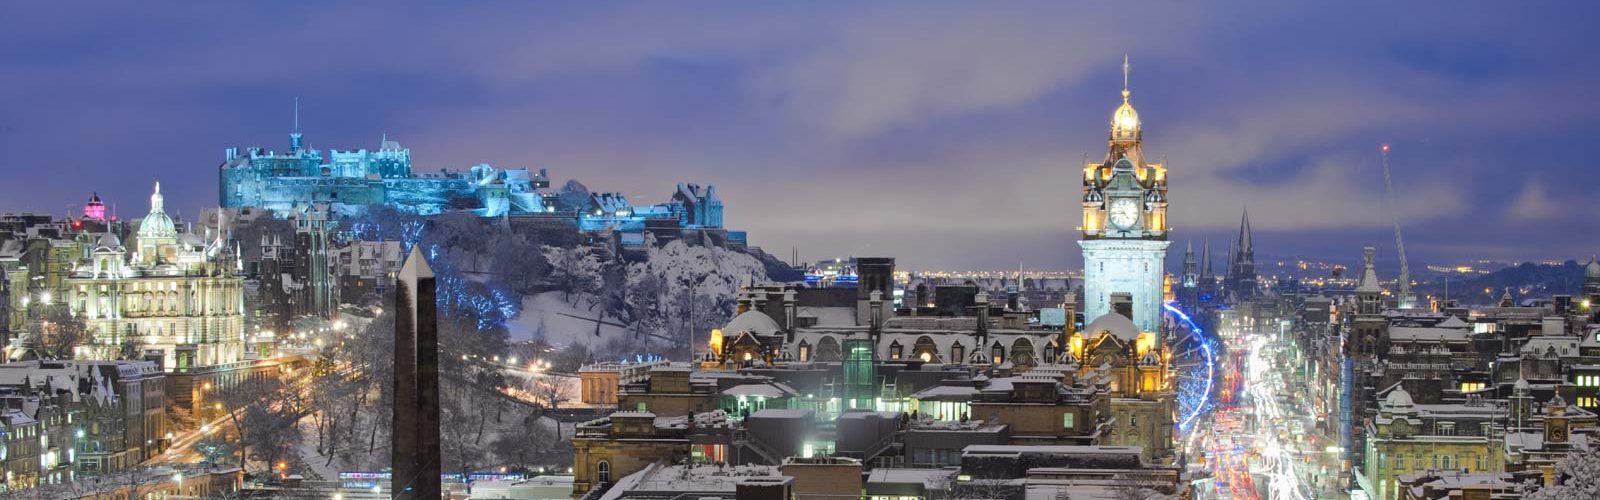 View of Edinburgh in winter from Calton Hill